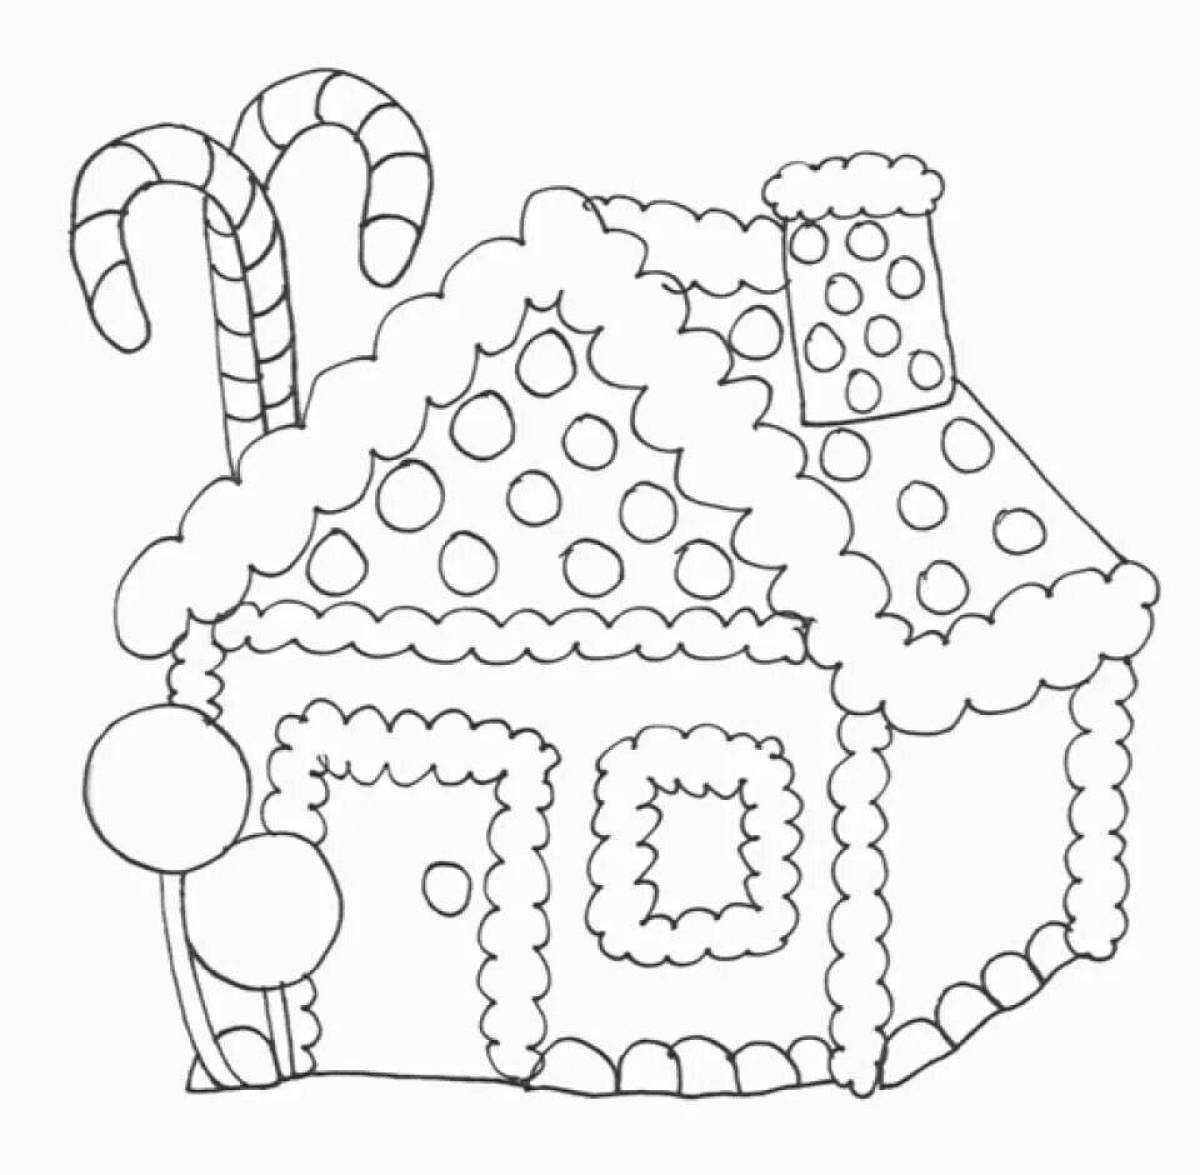 Bright Christmas house coloring book